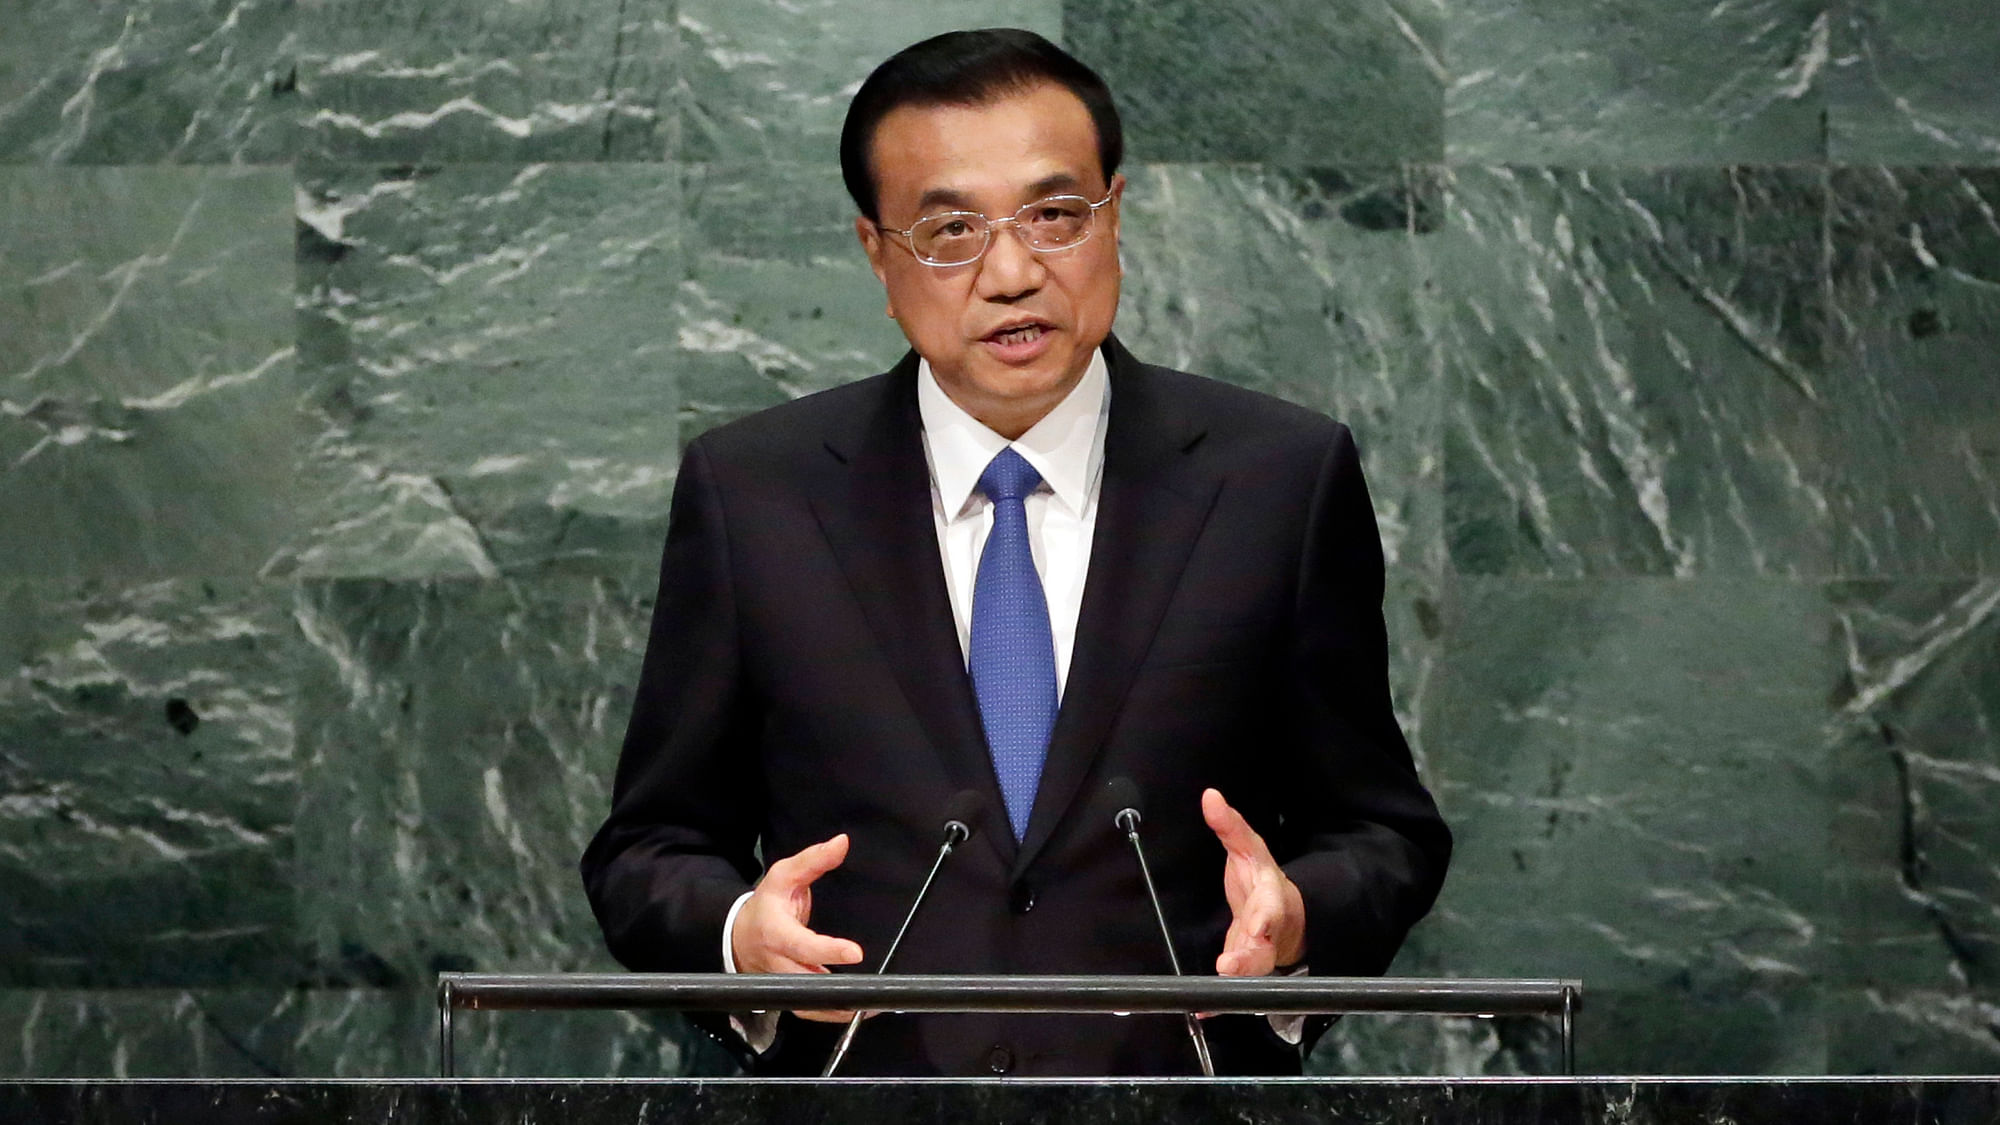 China’s Premier Li Keqiang addresses the 71st session of the United Nations General Assembly, at UN headquarters, Wednesday, 21 September 2016. (Photo: AP)